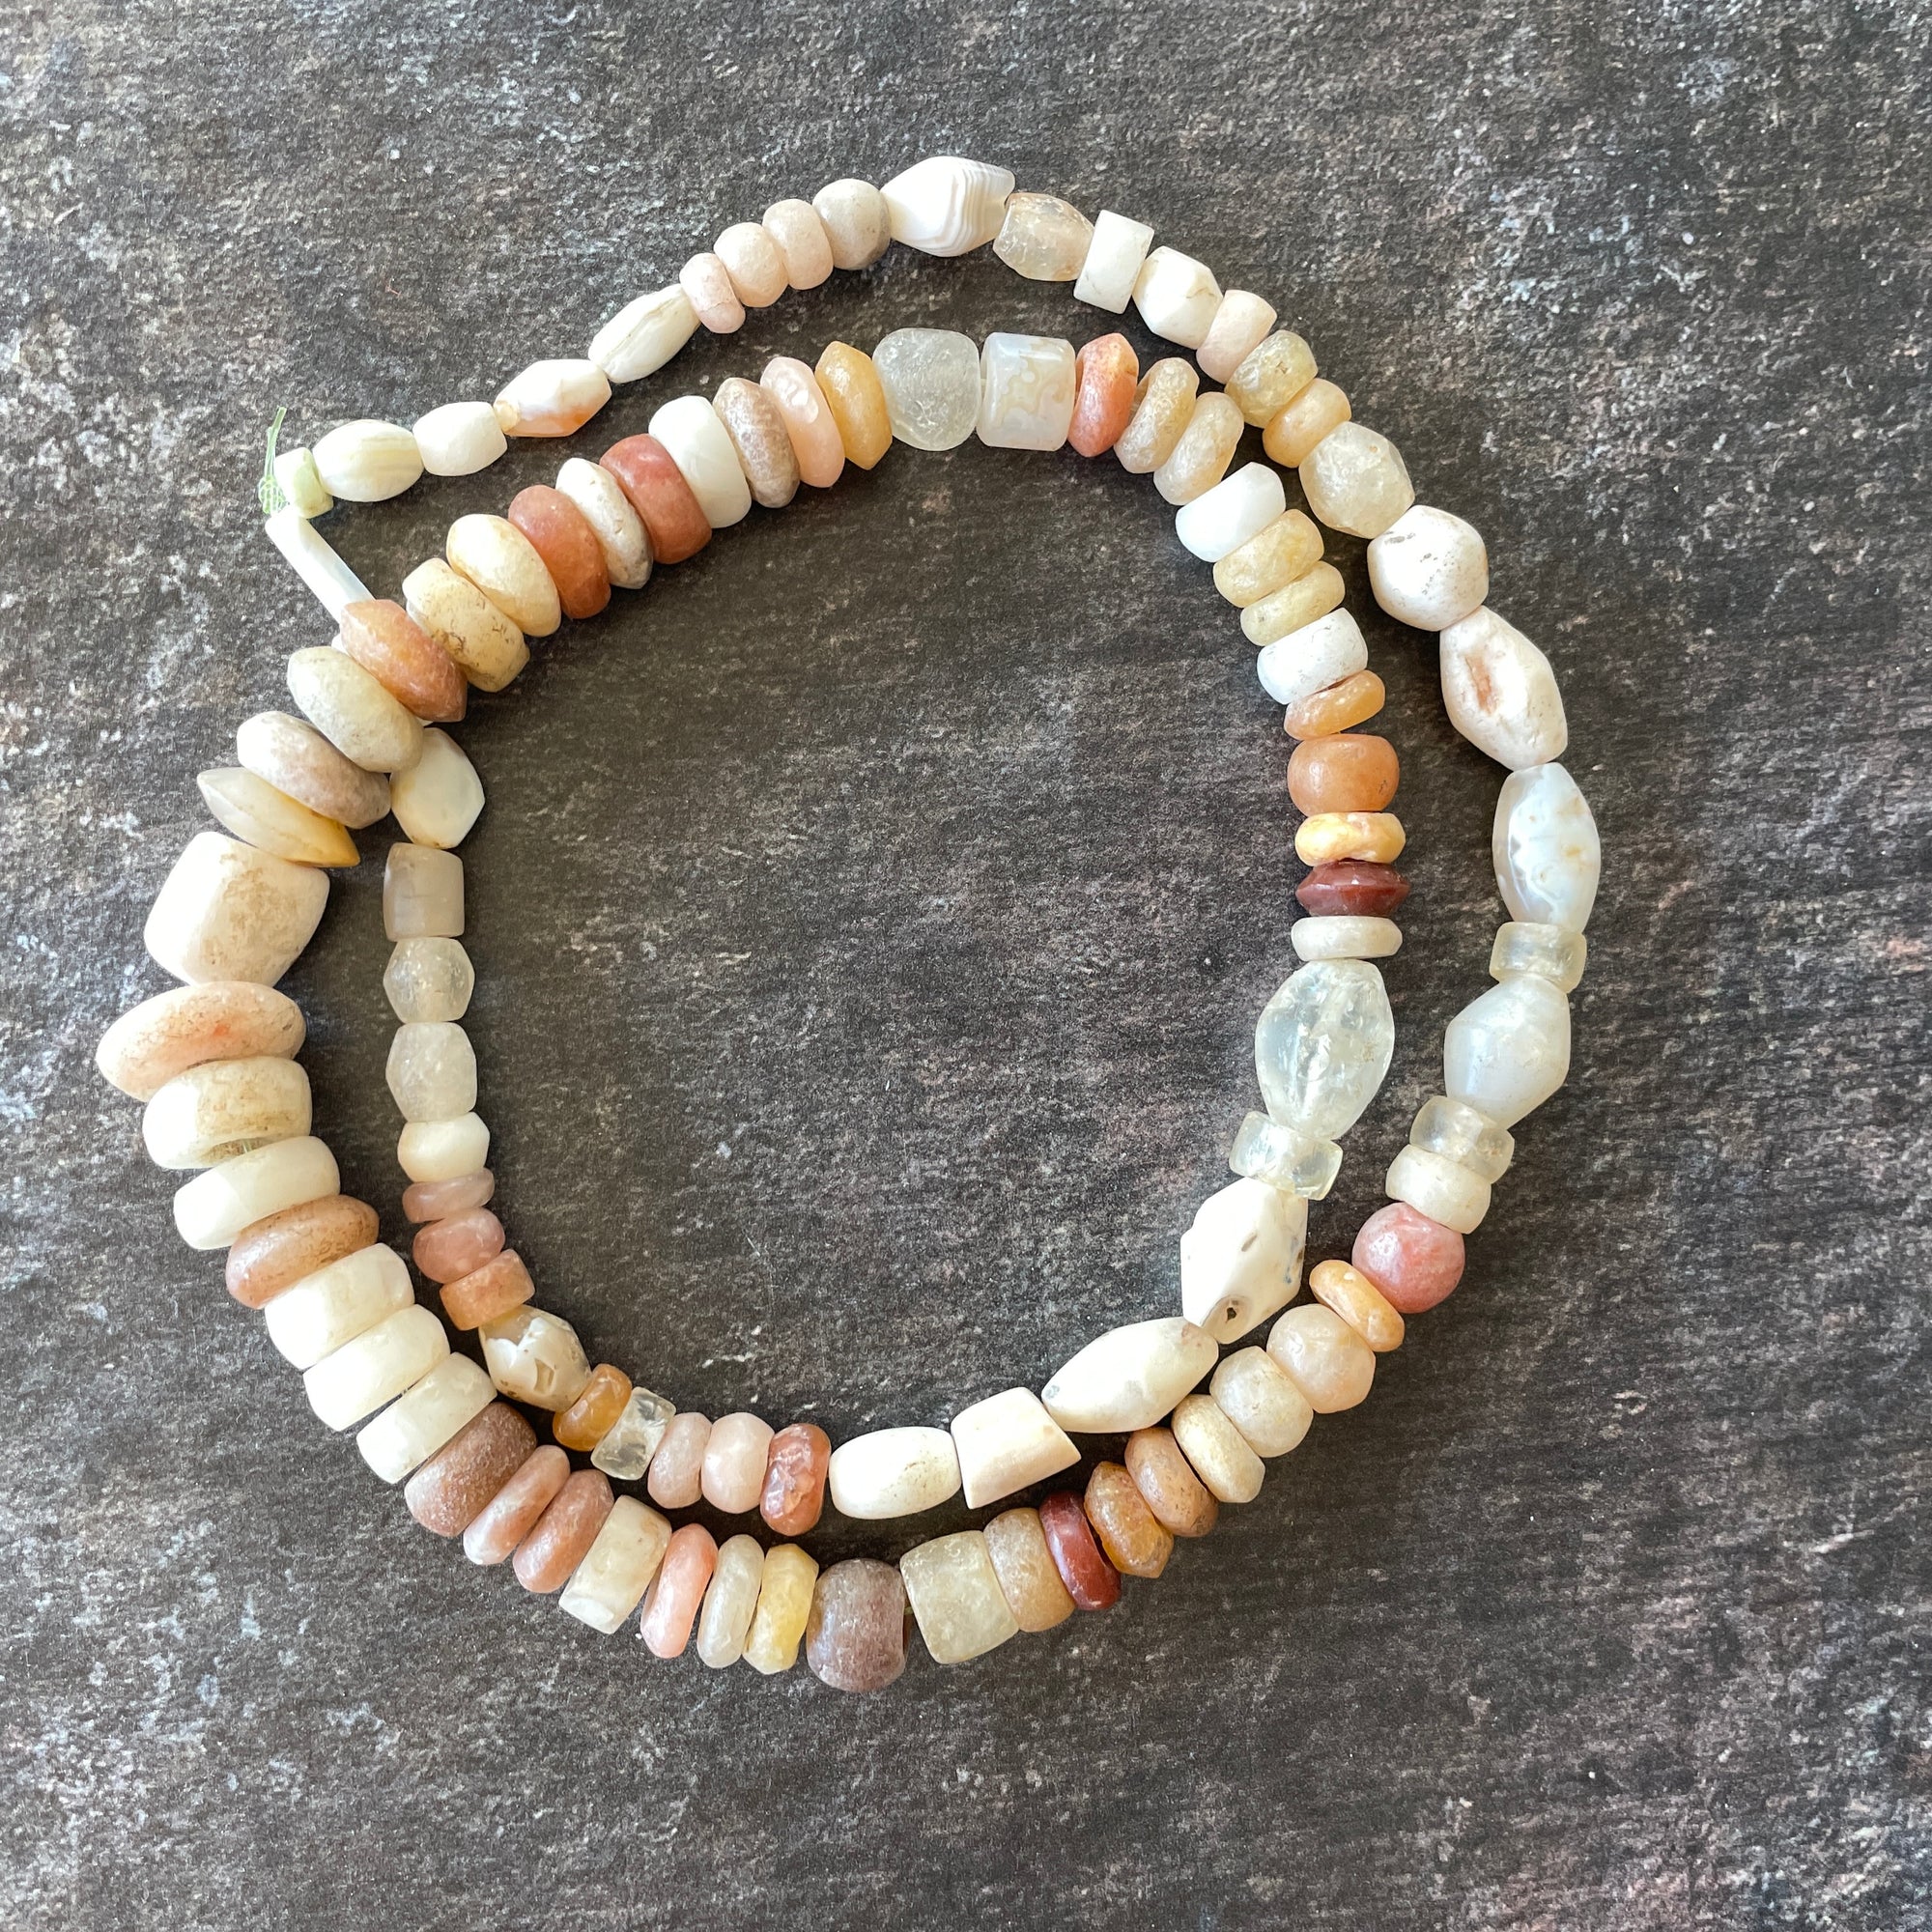 Antique Rustic Heishi Ostrich Egg Shell Beads from West Africa - Rita  Okrent Collection (AT0643m) - Rita Okrent Collection